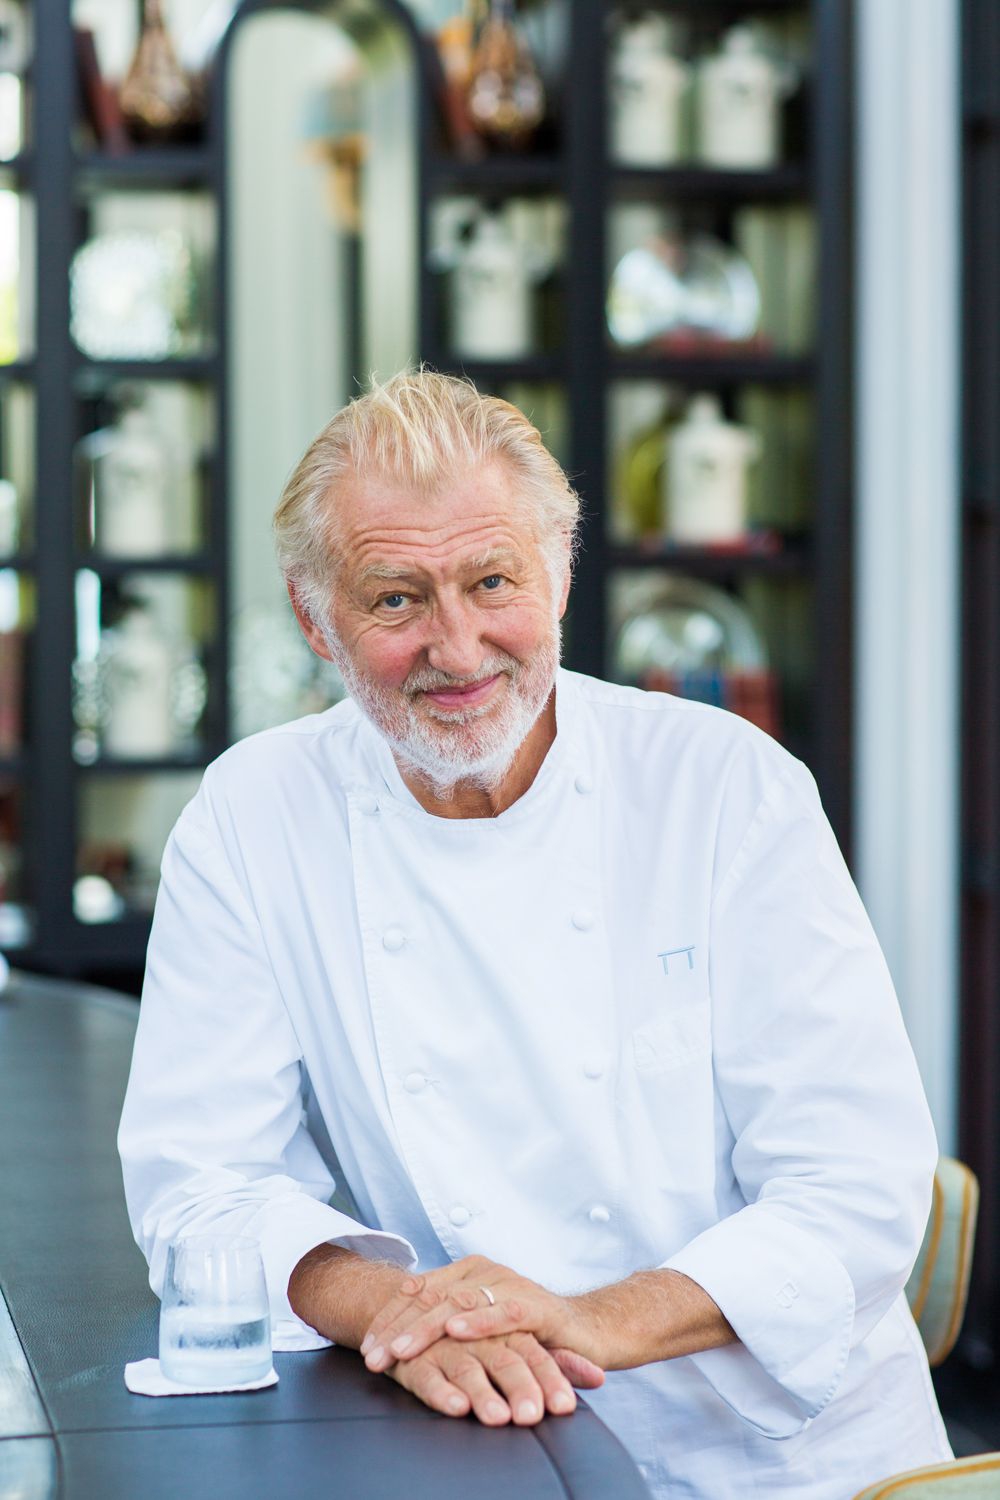 Pierre Gagnaire Presents French Finesse In La Maison 1888's Menu, Pierre Gagnaire&#8217;s Cuisine At La Maison 1888 Showcases French Finesse With Vietnamese Influence